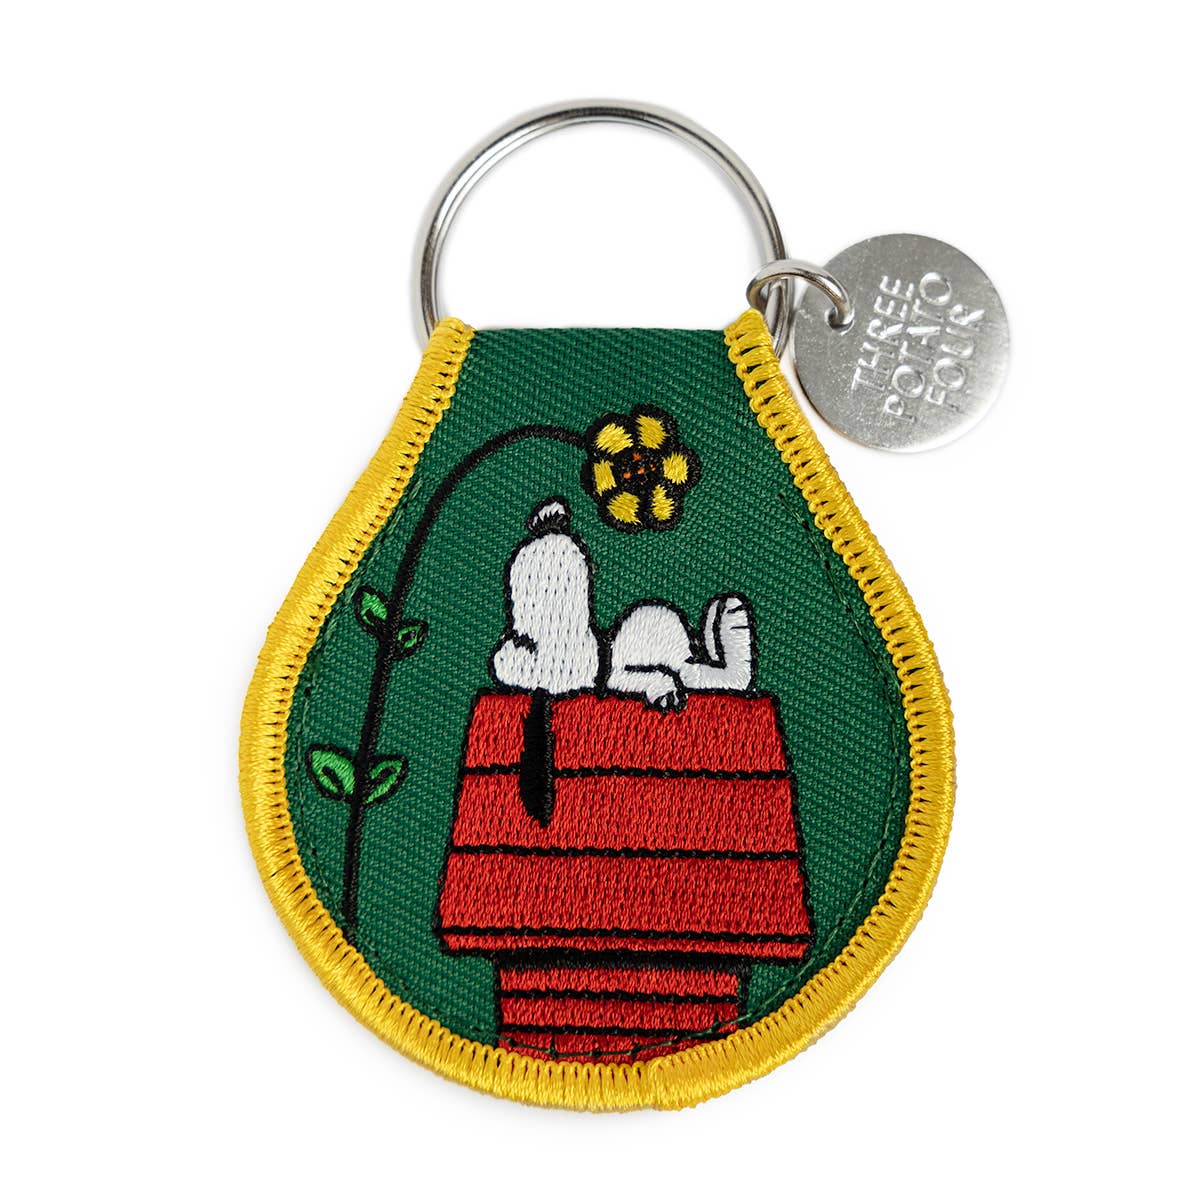 A Snoopy Doghouse Flower Patch Keychain made by Three Potato Four.